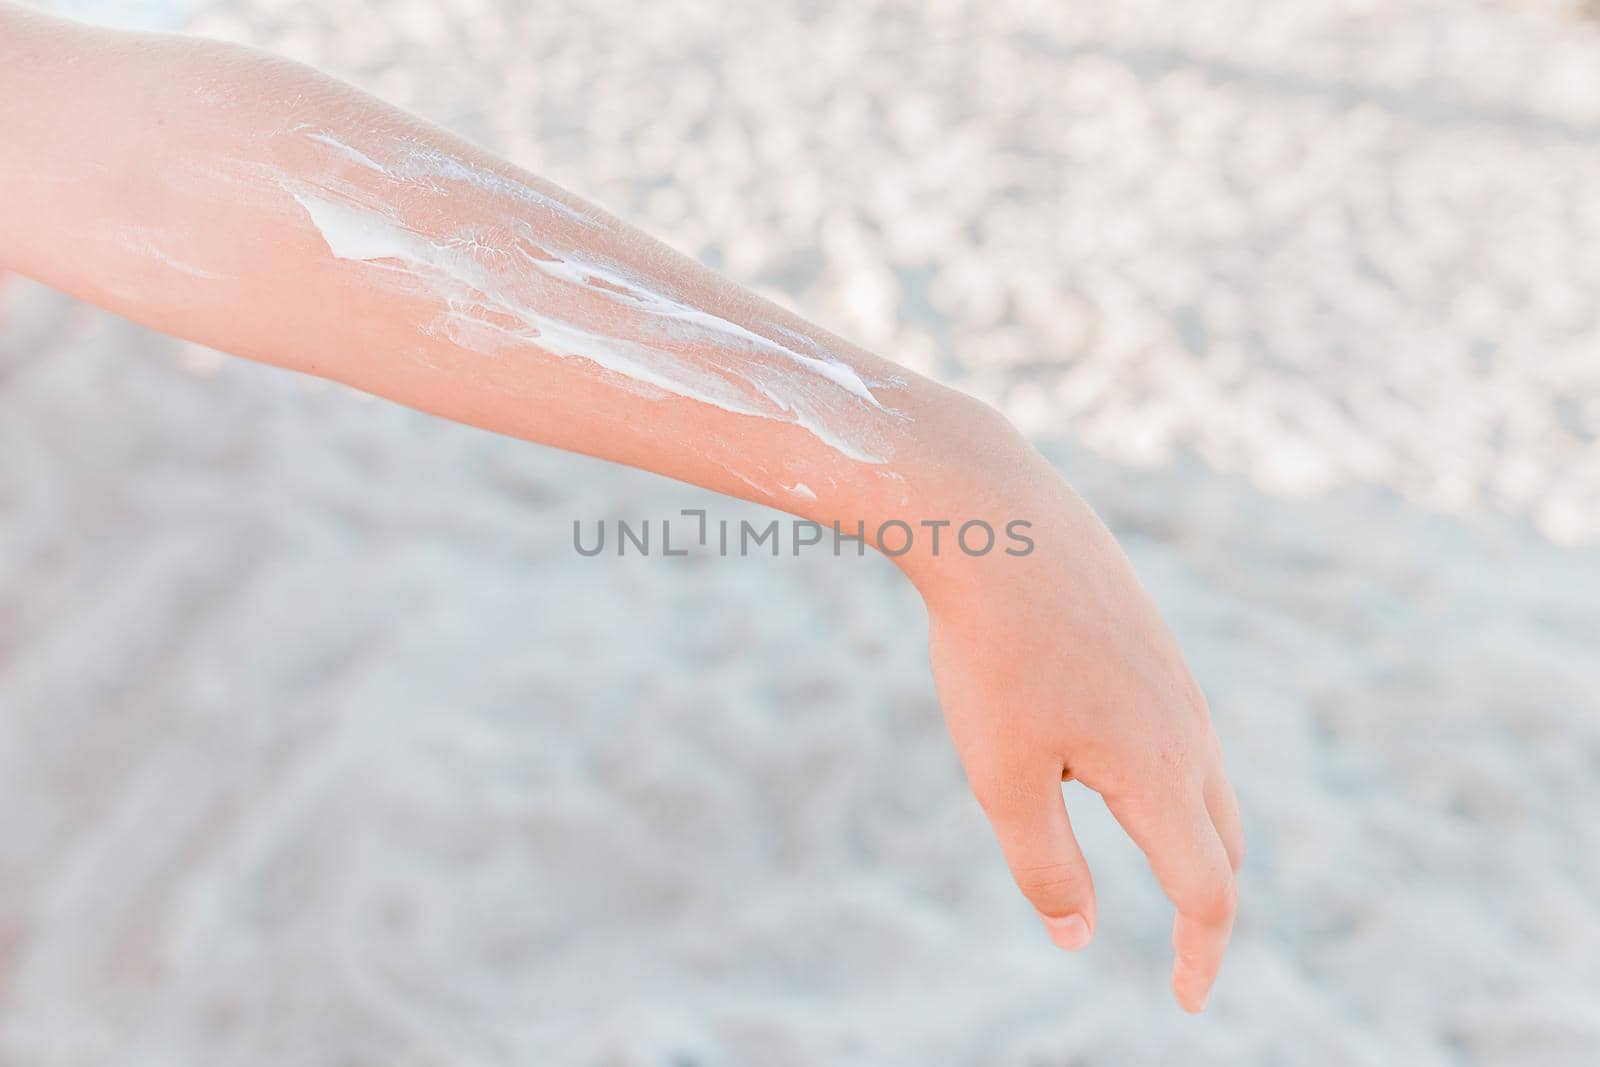 The hand of a young girl with a white pattern of sunscreen and protection from sunlight against the background of beach sand.